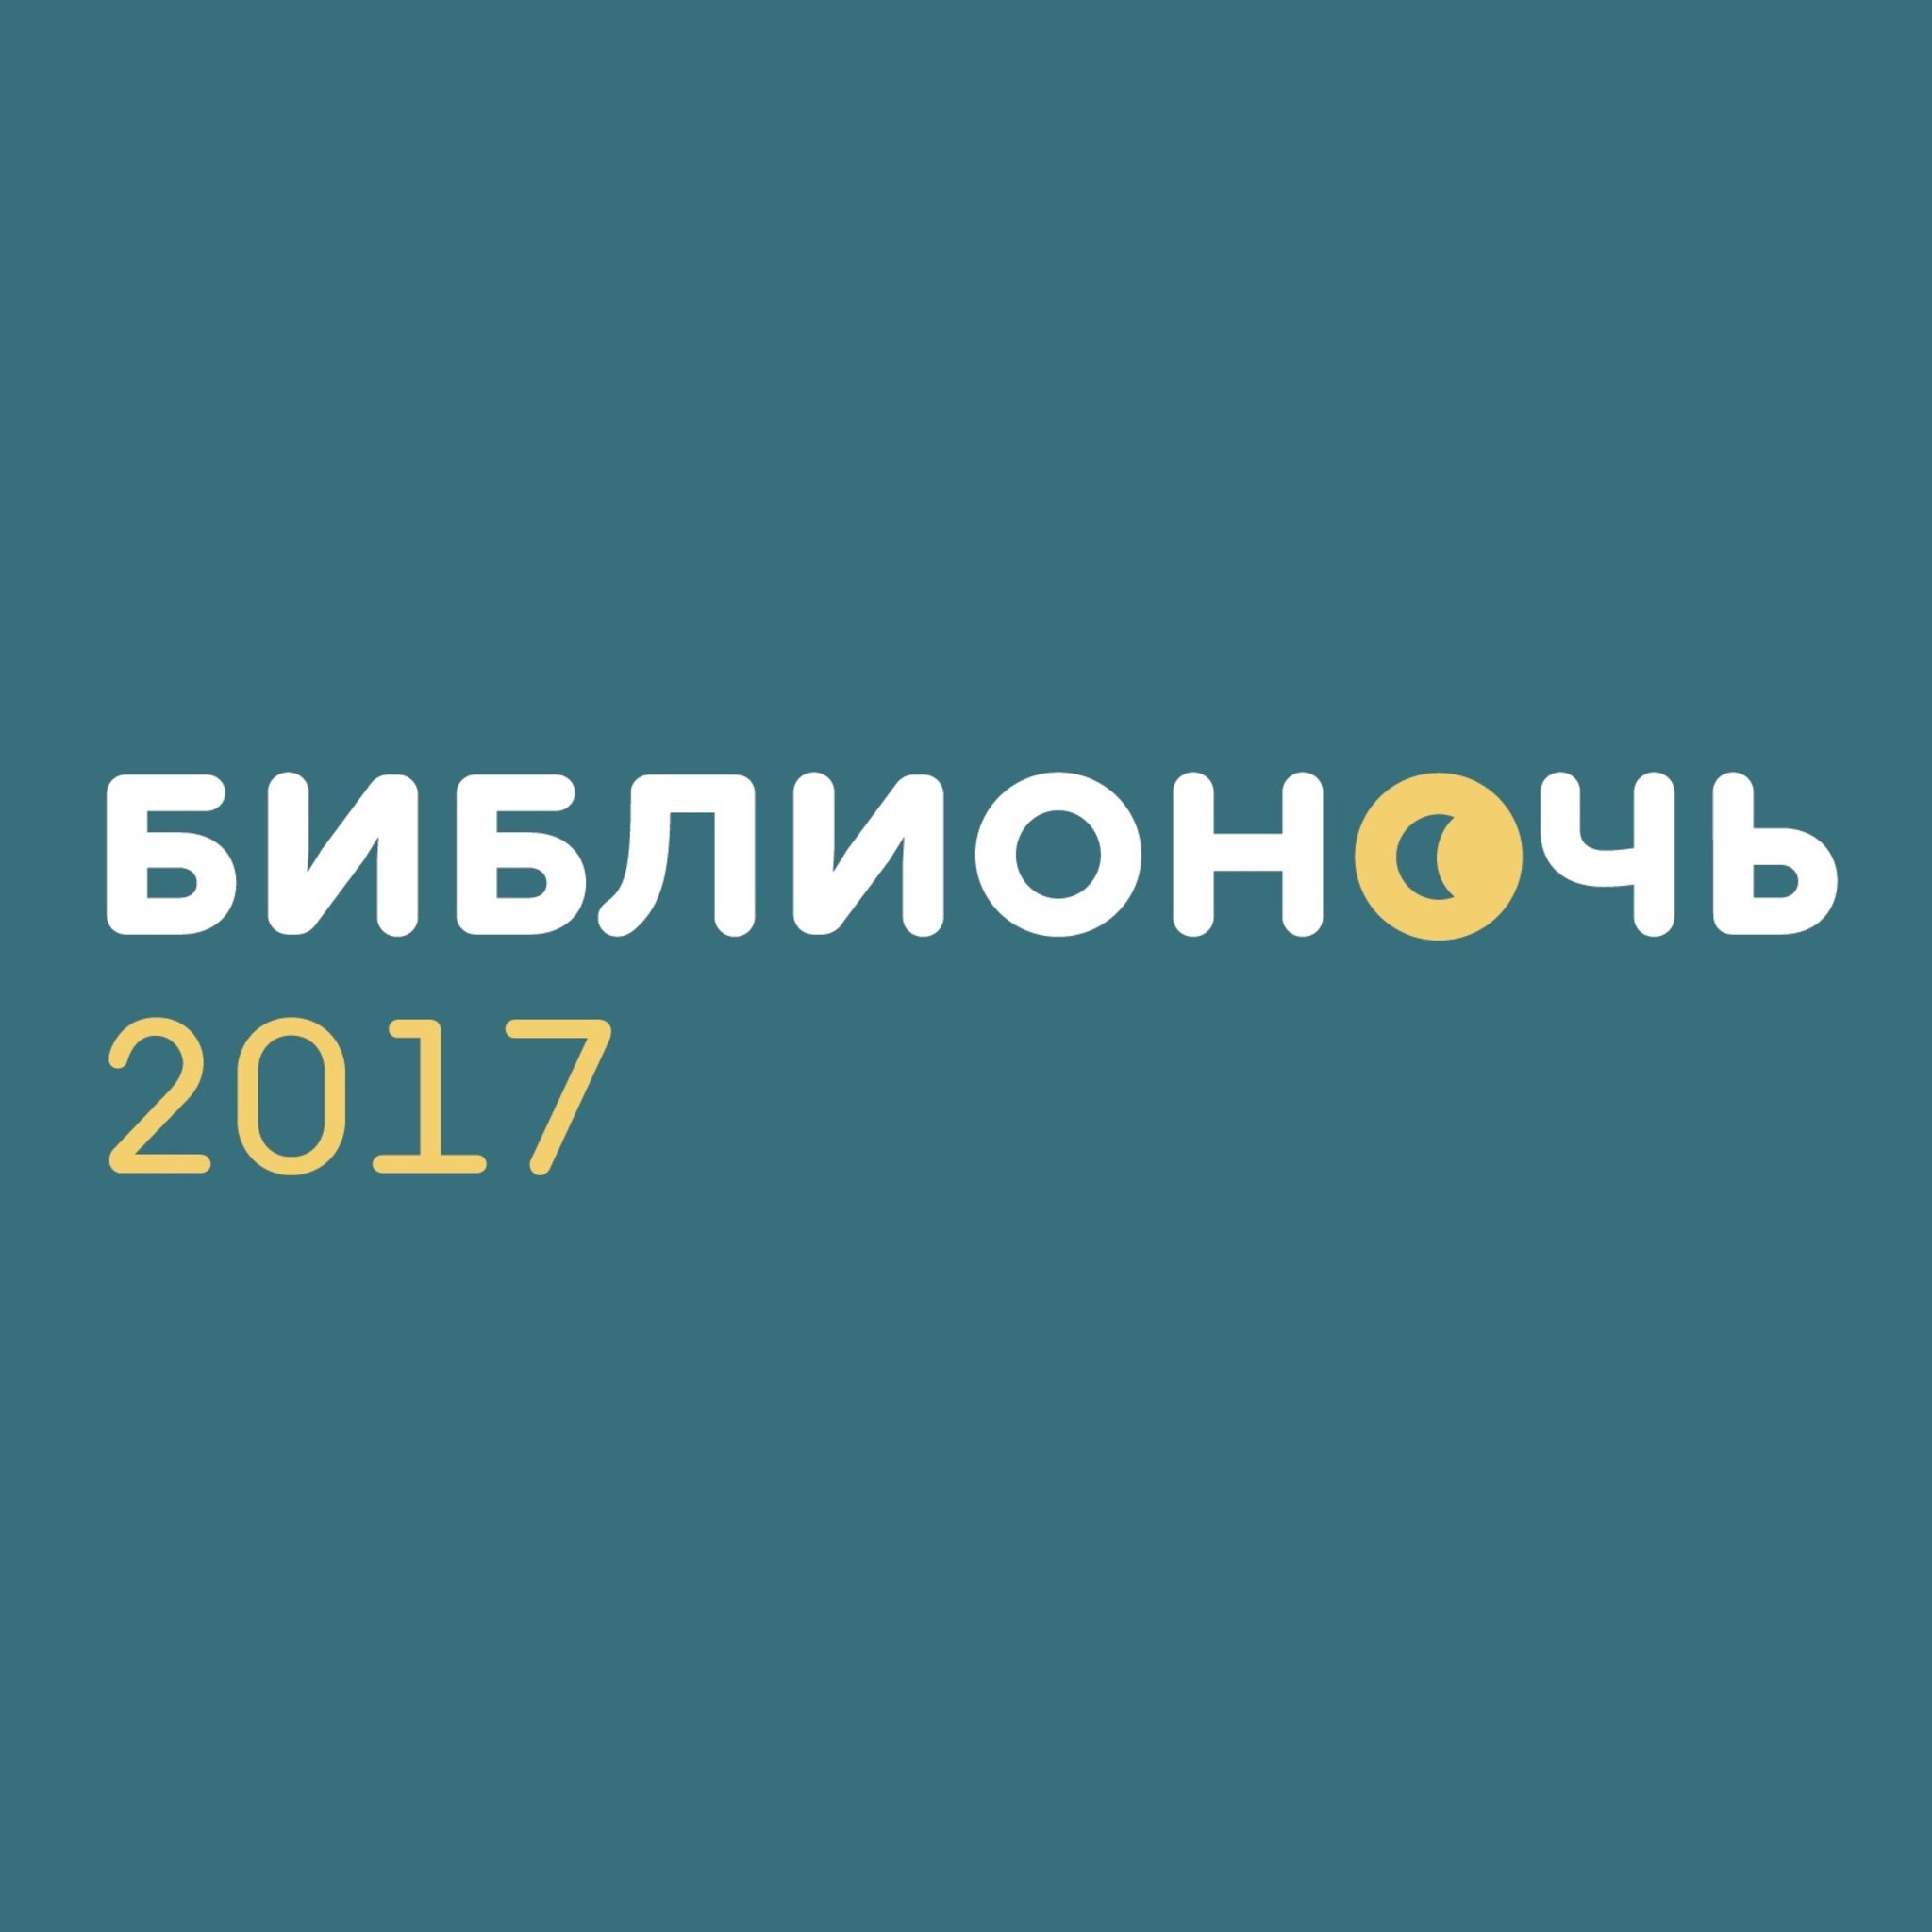 Bibliotech 2017 in the library of Gogol